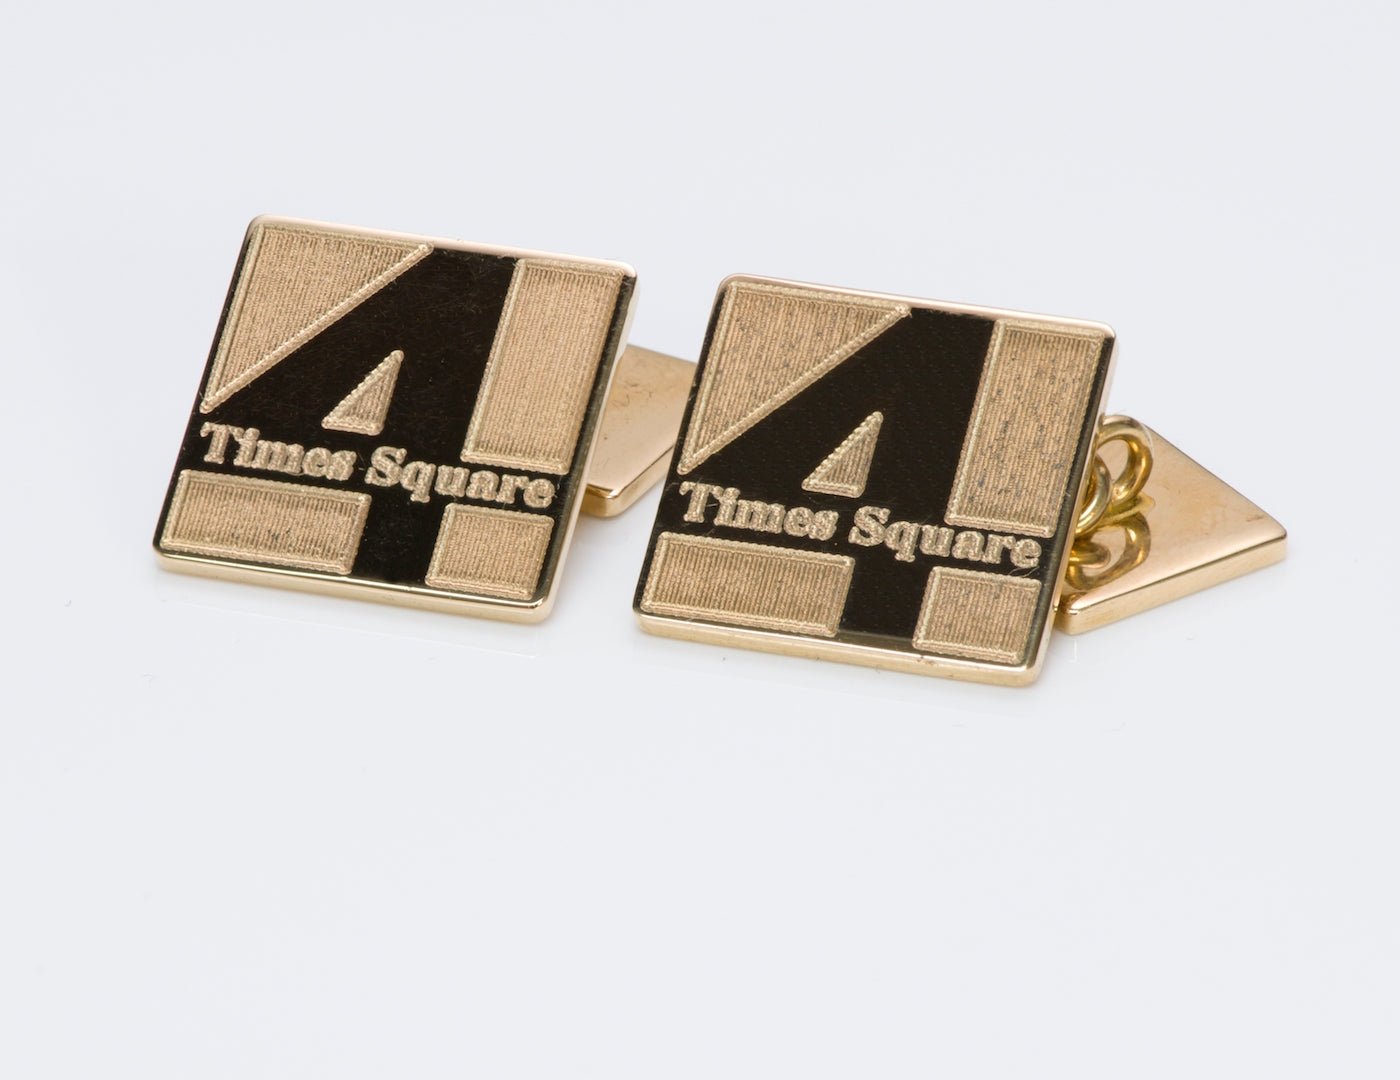 Cartier "4 Times Square" Gold Cufflinks - DSF Antique Jewelry